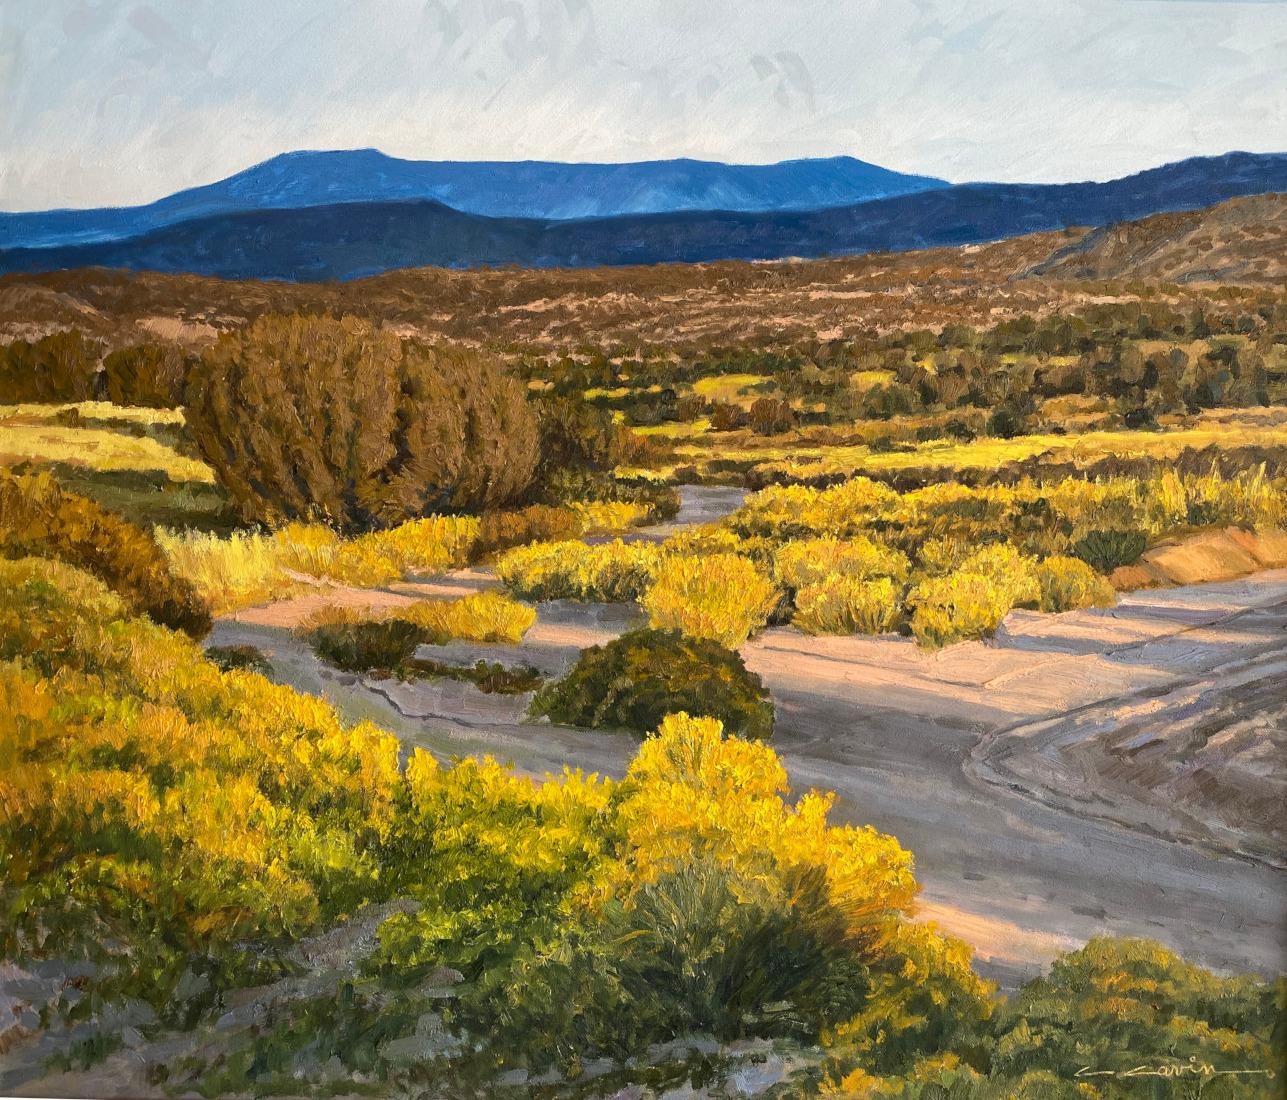 CLIFF CAVIN Landscape Painting - "CHAMISA IN BLOOM" NEW MEXICO LANDSCAPE